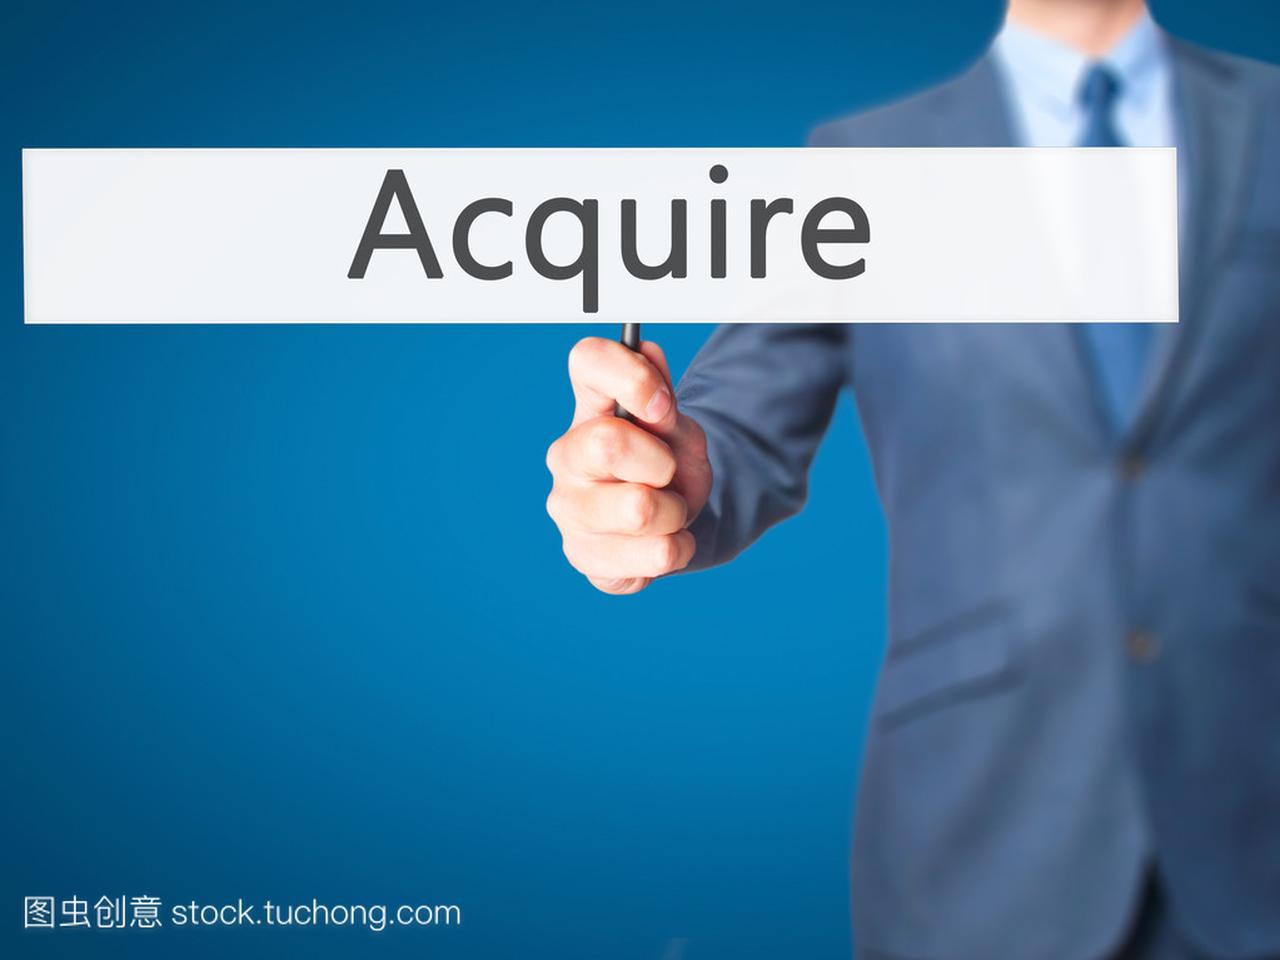 Acquire - Business man showing sign